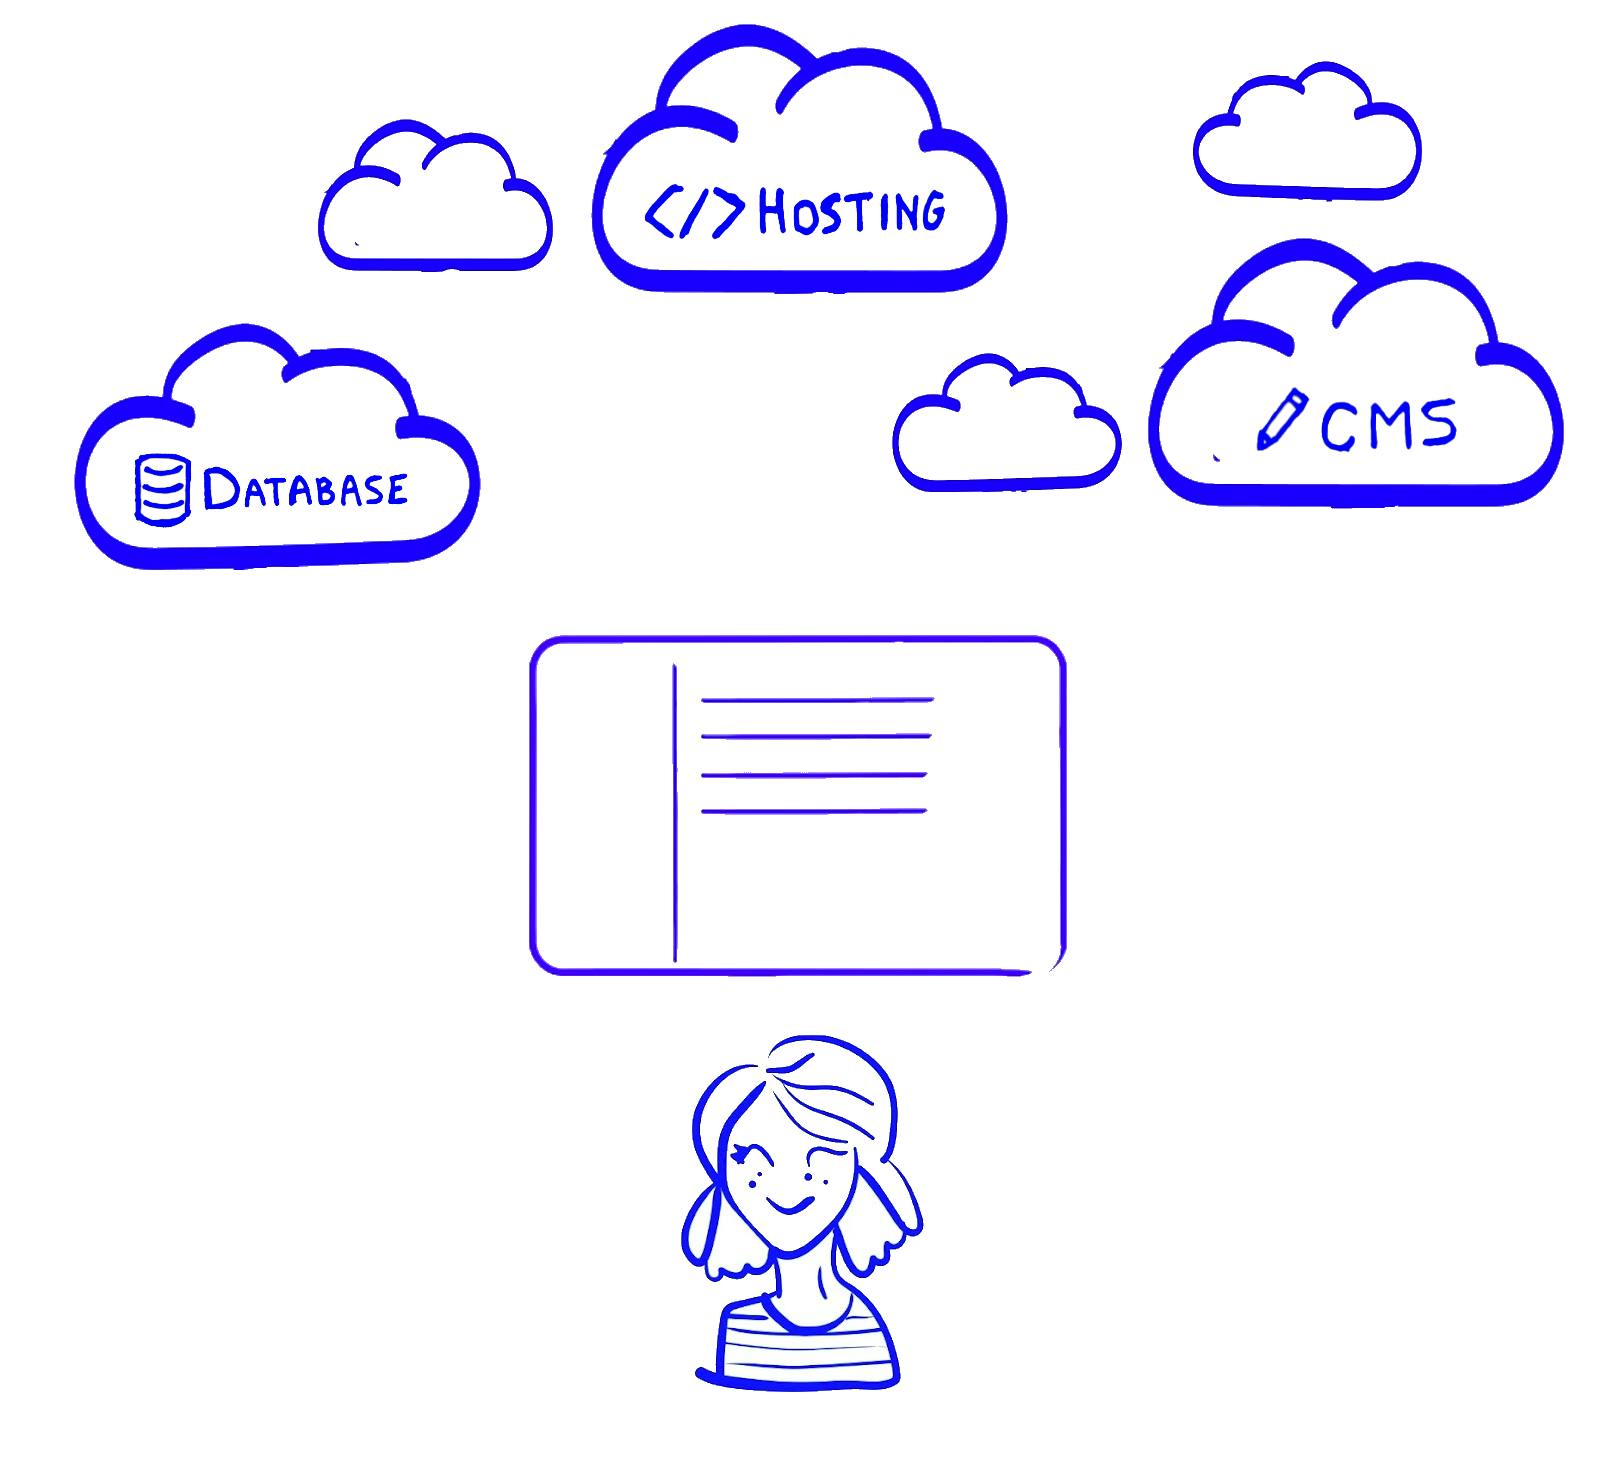 Illustration representing a user with a draft of a website over it and big clouds representing the database, hosting and CMS